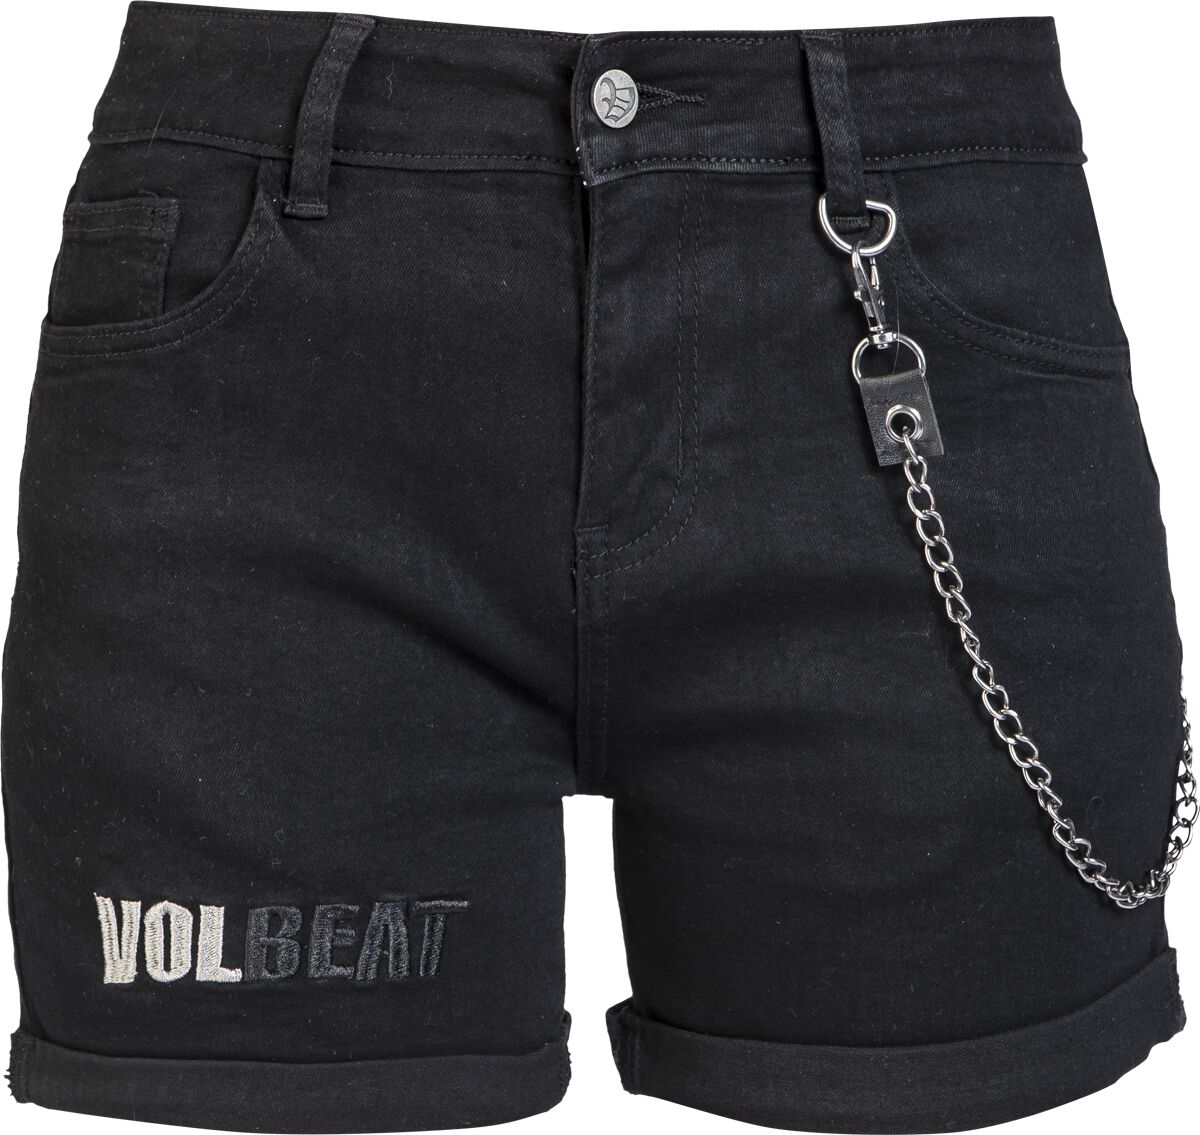 Volbeat EMP Signature Collection Hotpant schwarz in 27